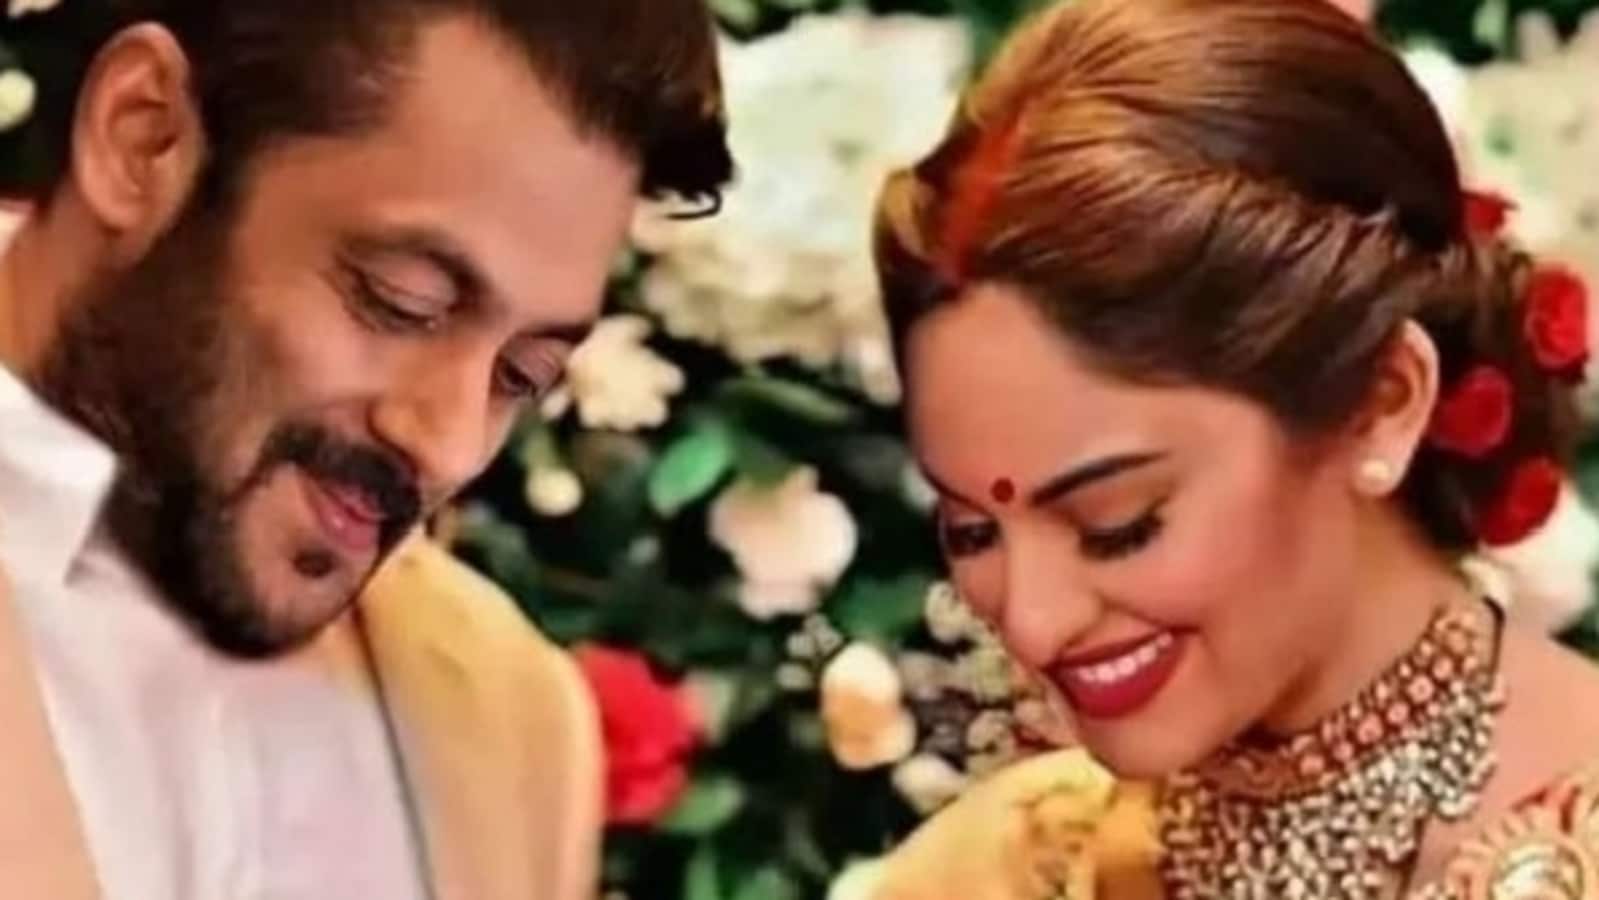 Xxx Salman Khan Abp - Salman, Sonakshi's fans are confused as fake pic shows them as a married  couple | Bollywood - Hindustan Times